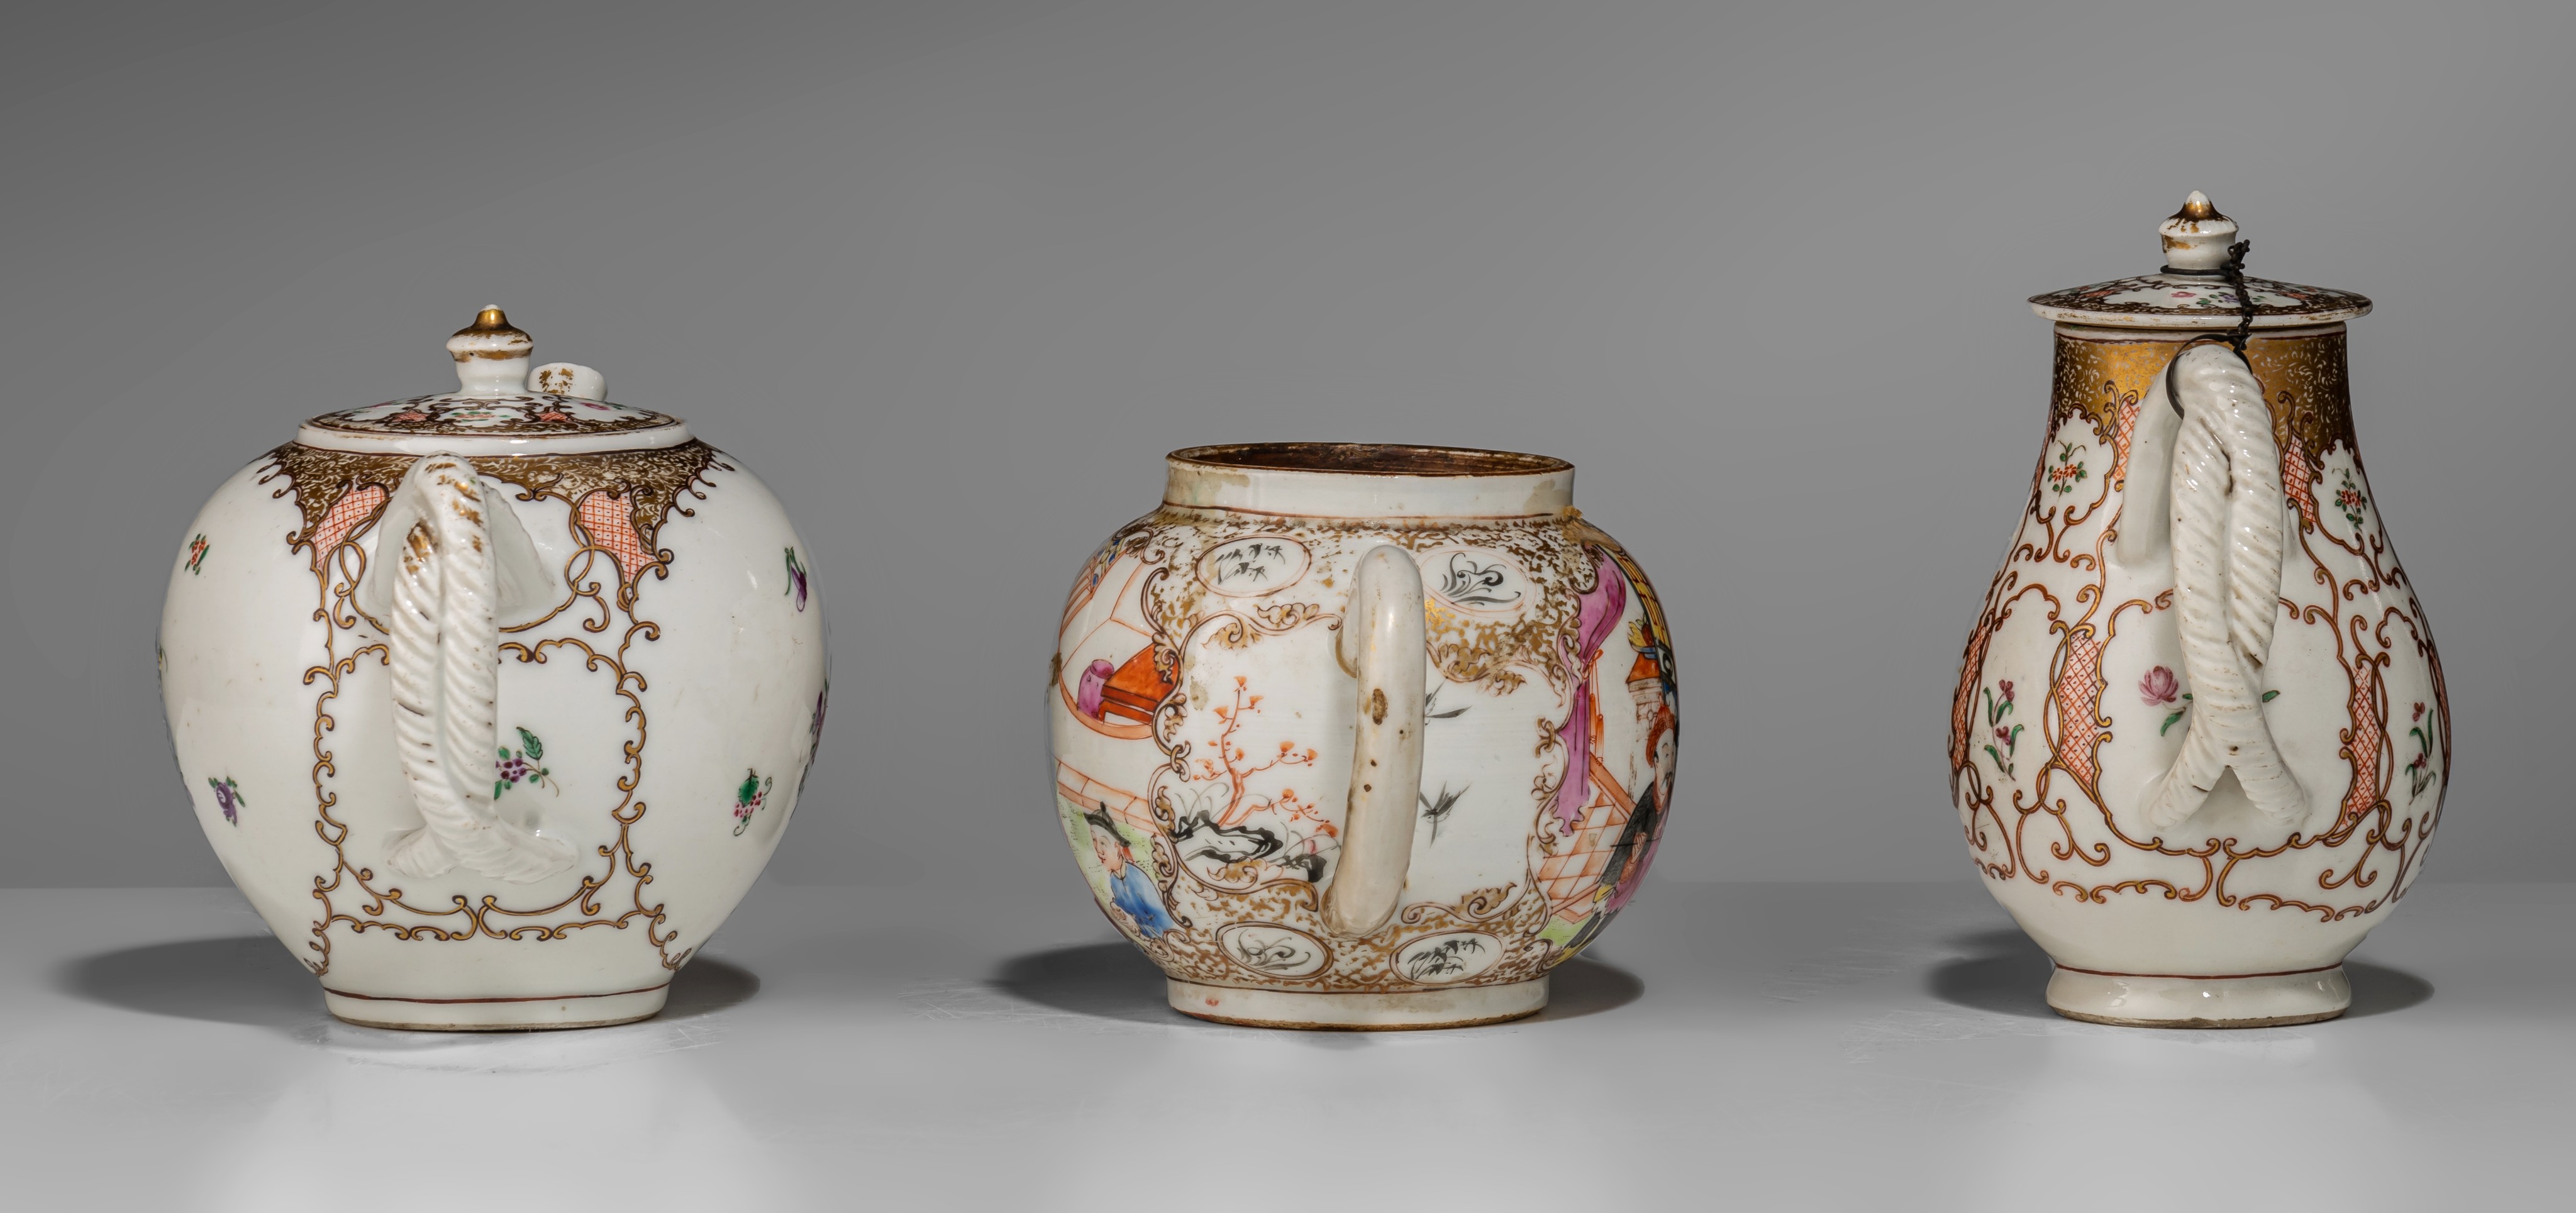 A collection of famille rose and gilt decorated export porcelain ware, 18thC, largest - H 12,5 - 34, - Image 5 of 20